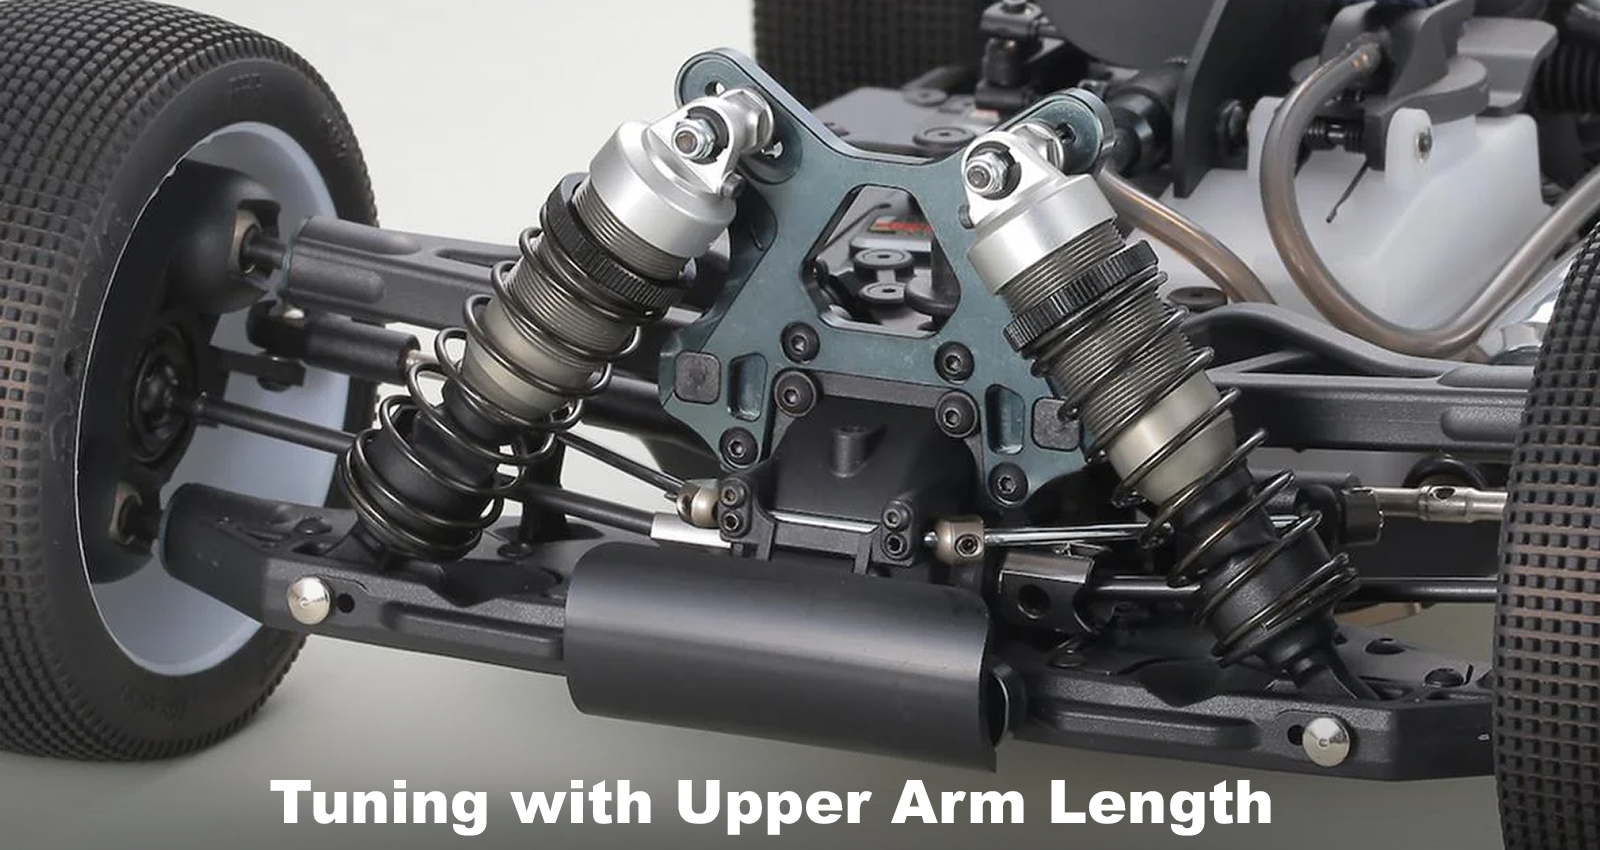 Tuning with Upper Arm Length